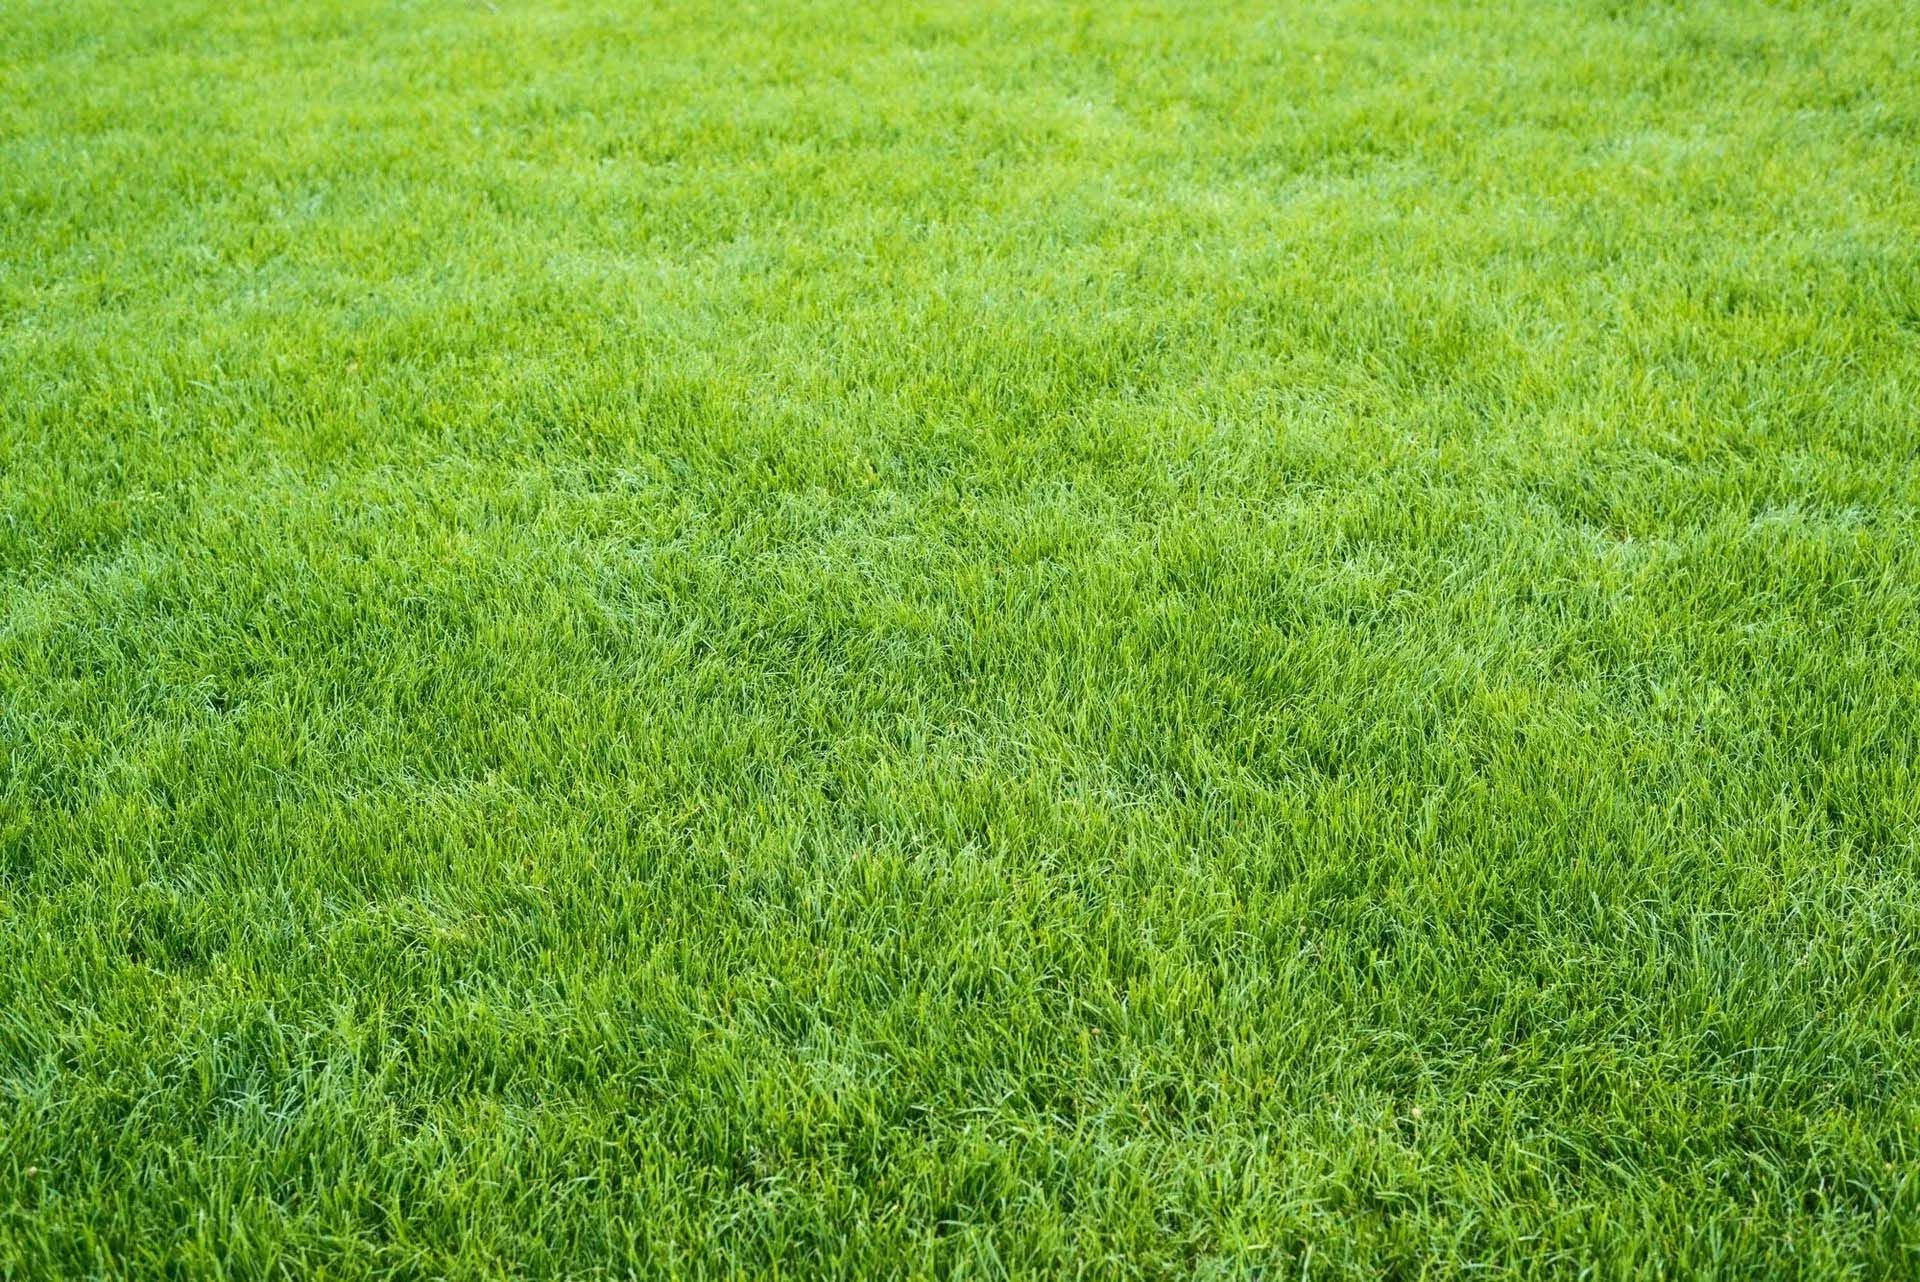 Things to Consider When Choosing the Best Type of Grass for Your Lawn